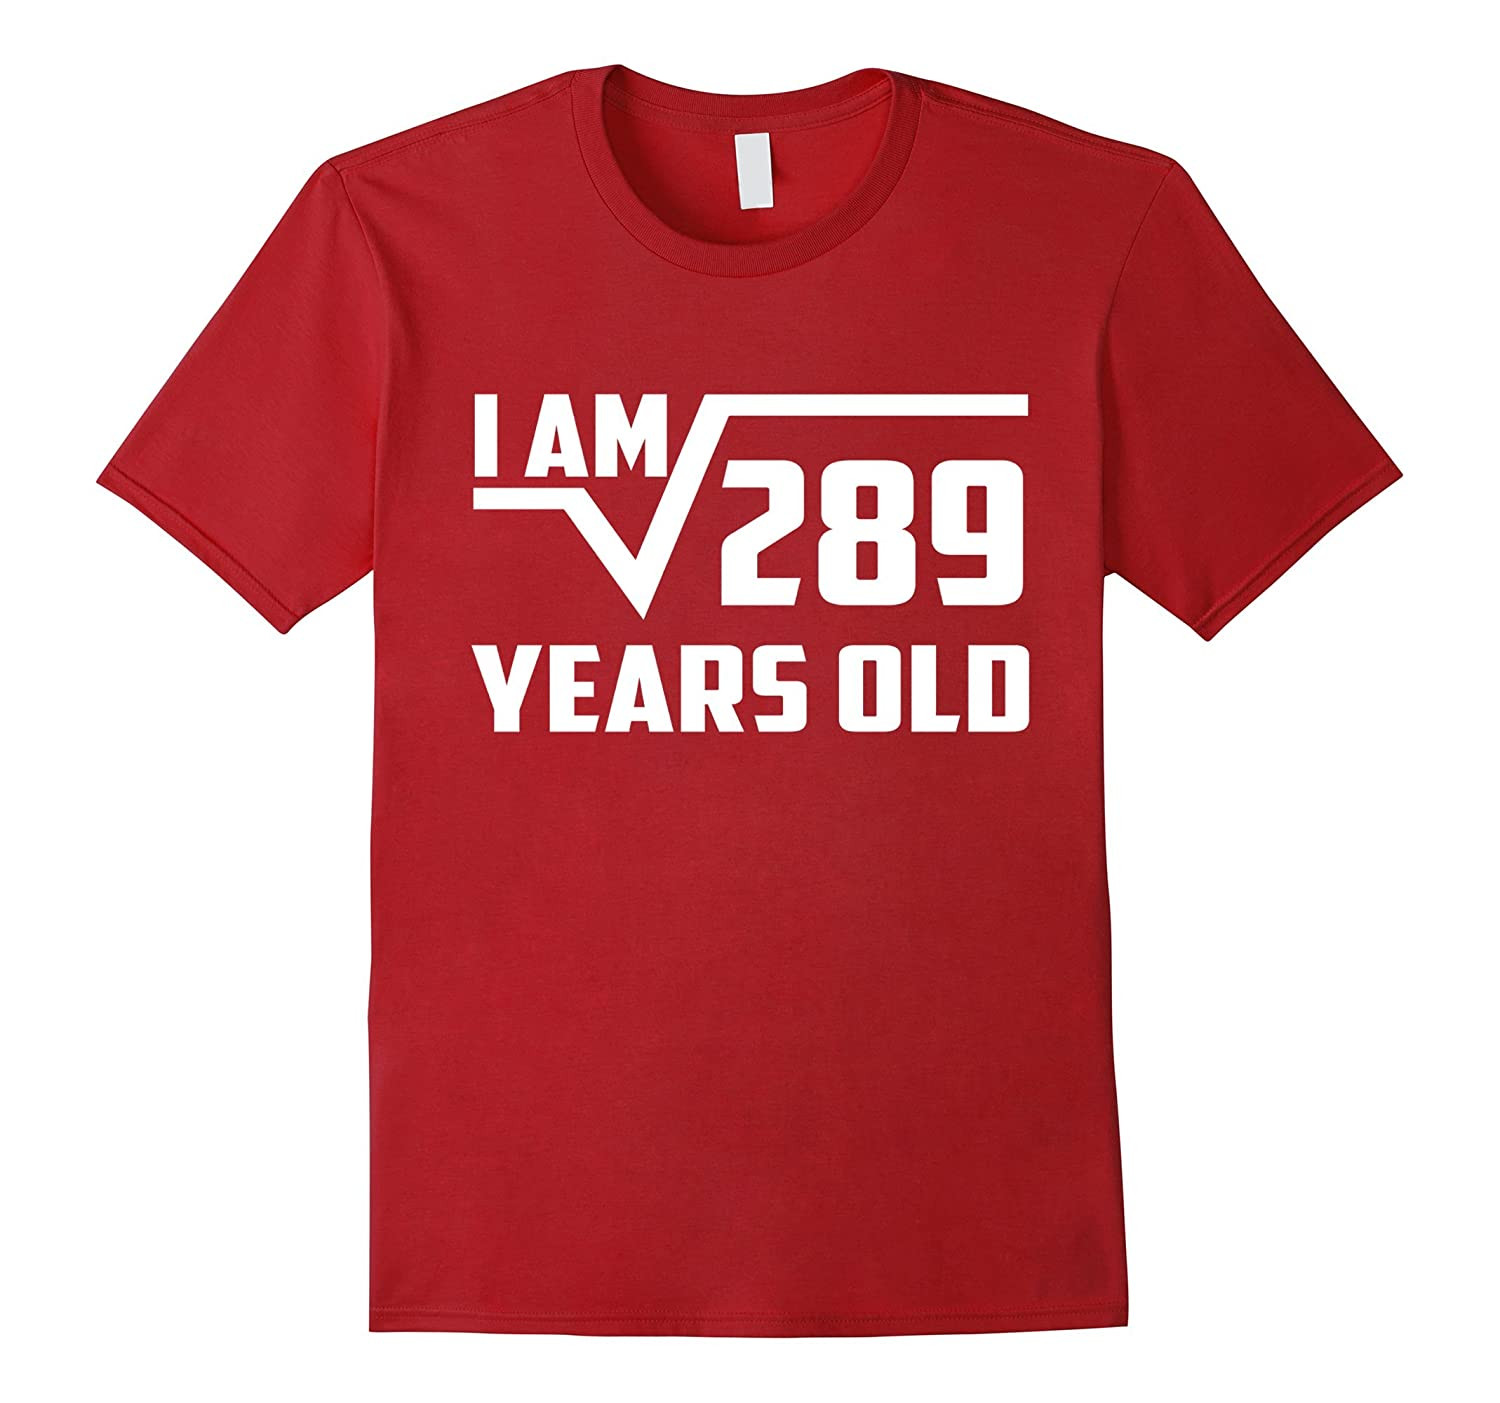 17 Year Old Boy Birthday Gift Ideas
 17 Year Old Square Root 289 Shirt 17th Birthday Gift Boy